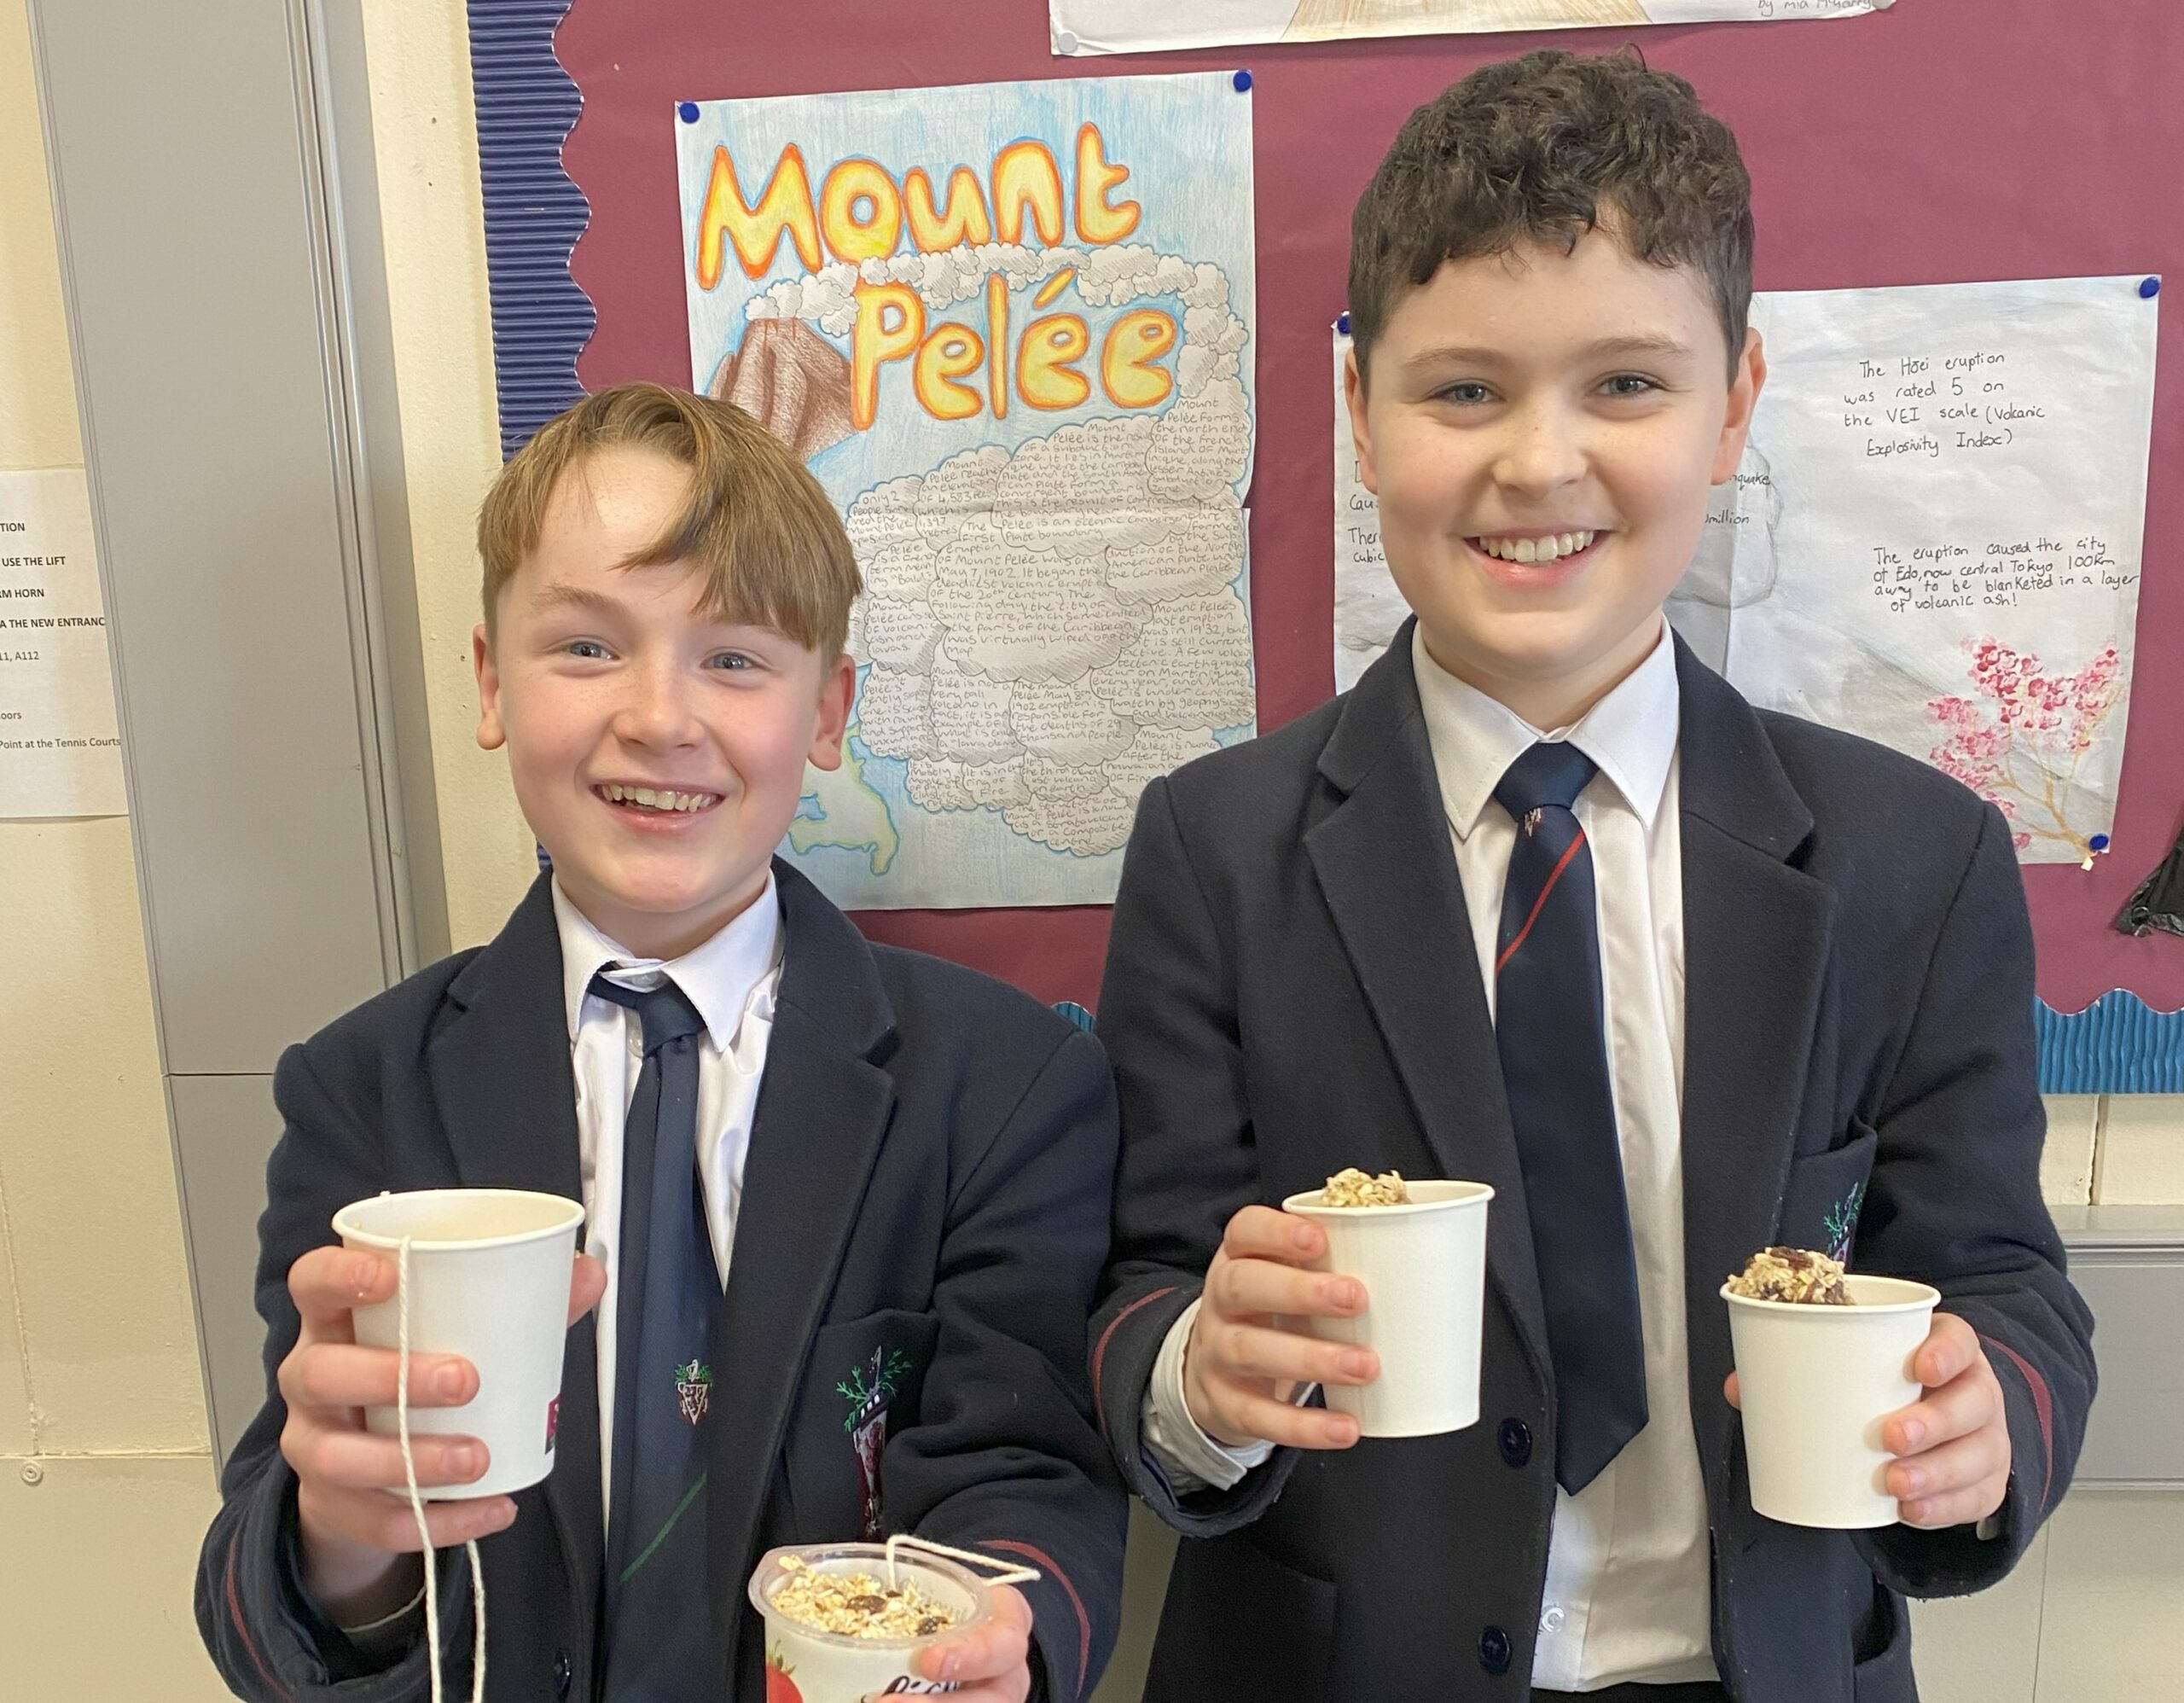 Two boys in school uniform smiling at the camera holding bird feed in cups